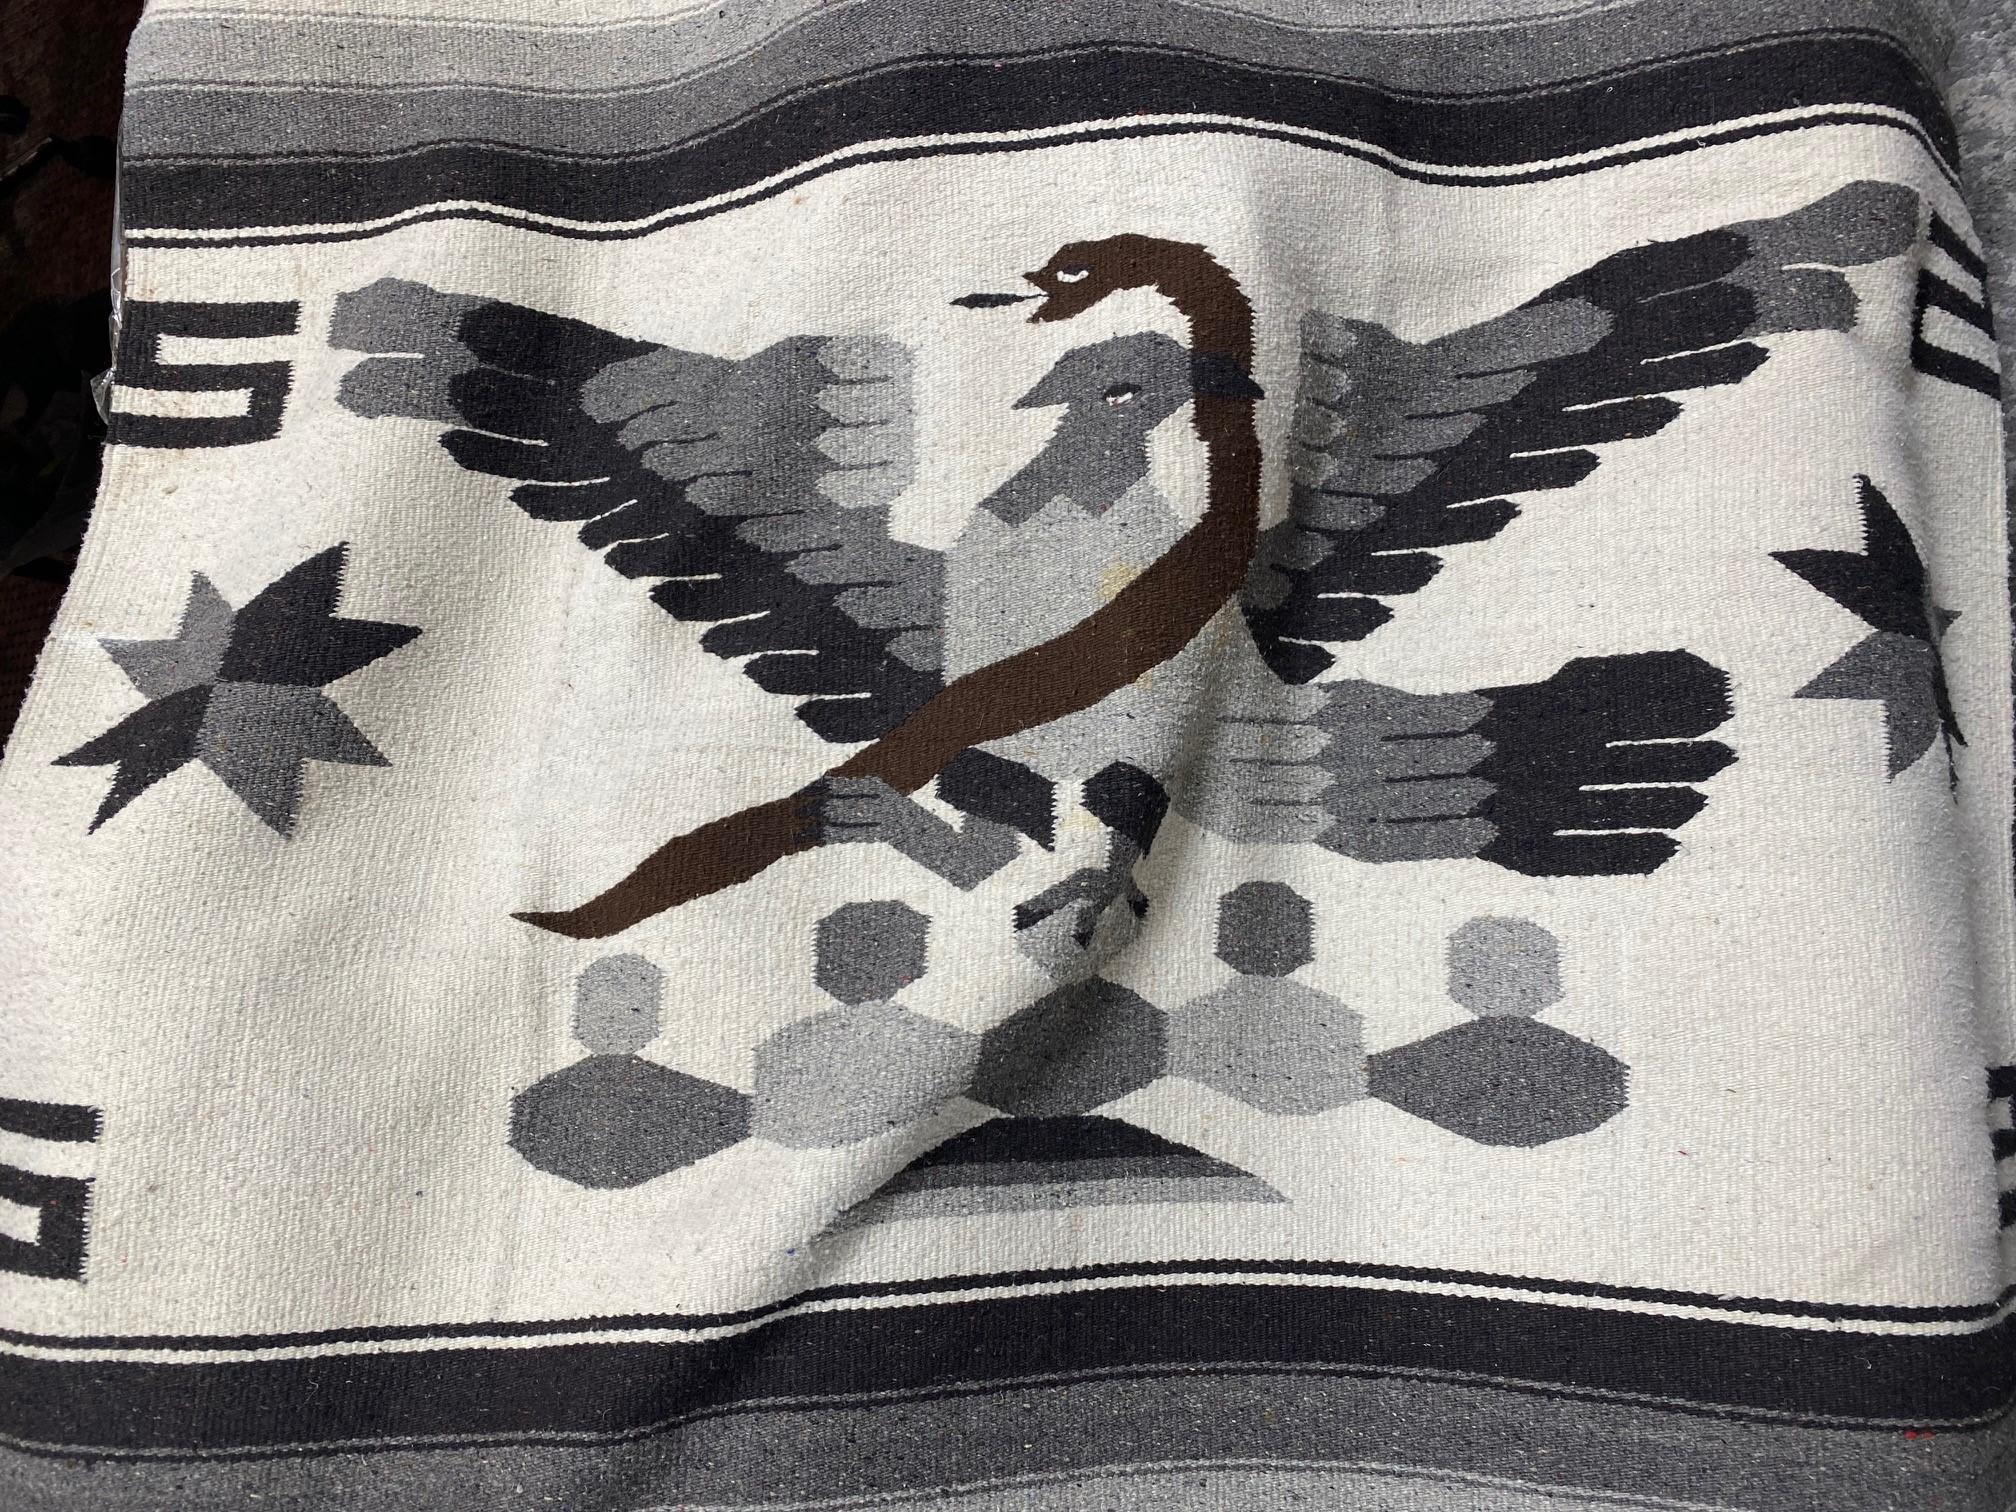 Tribal Large Wool North American Mexican Kilim Serape Blanket Rug with Eagle and Snake